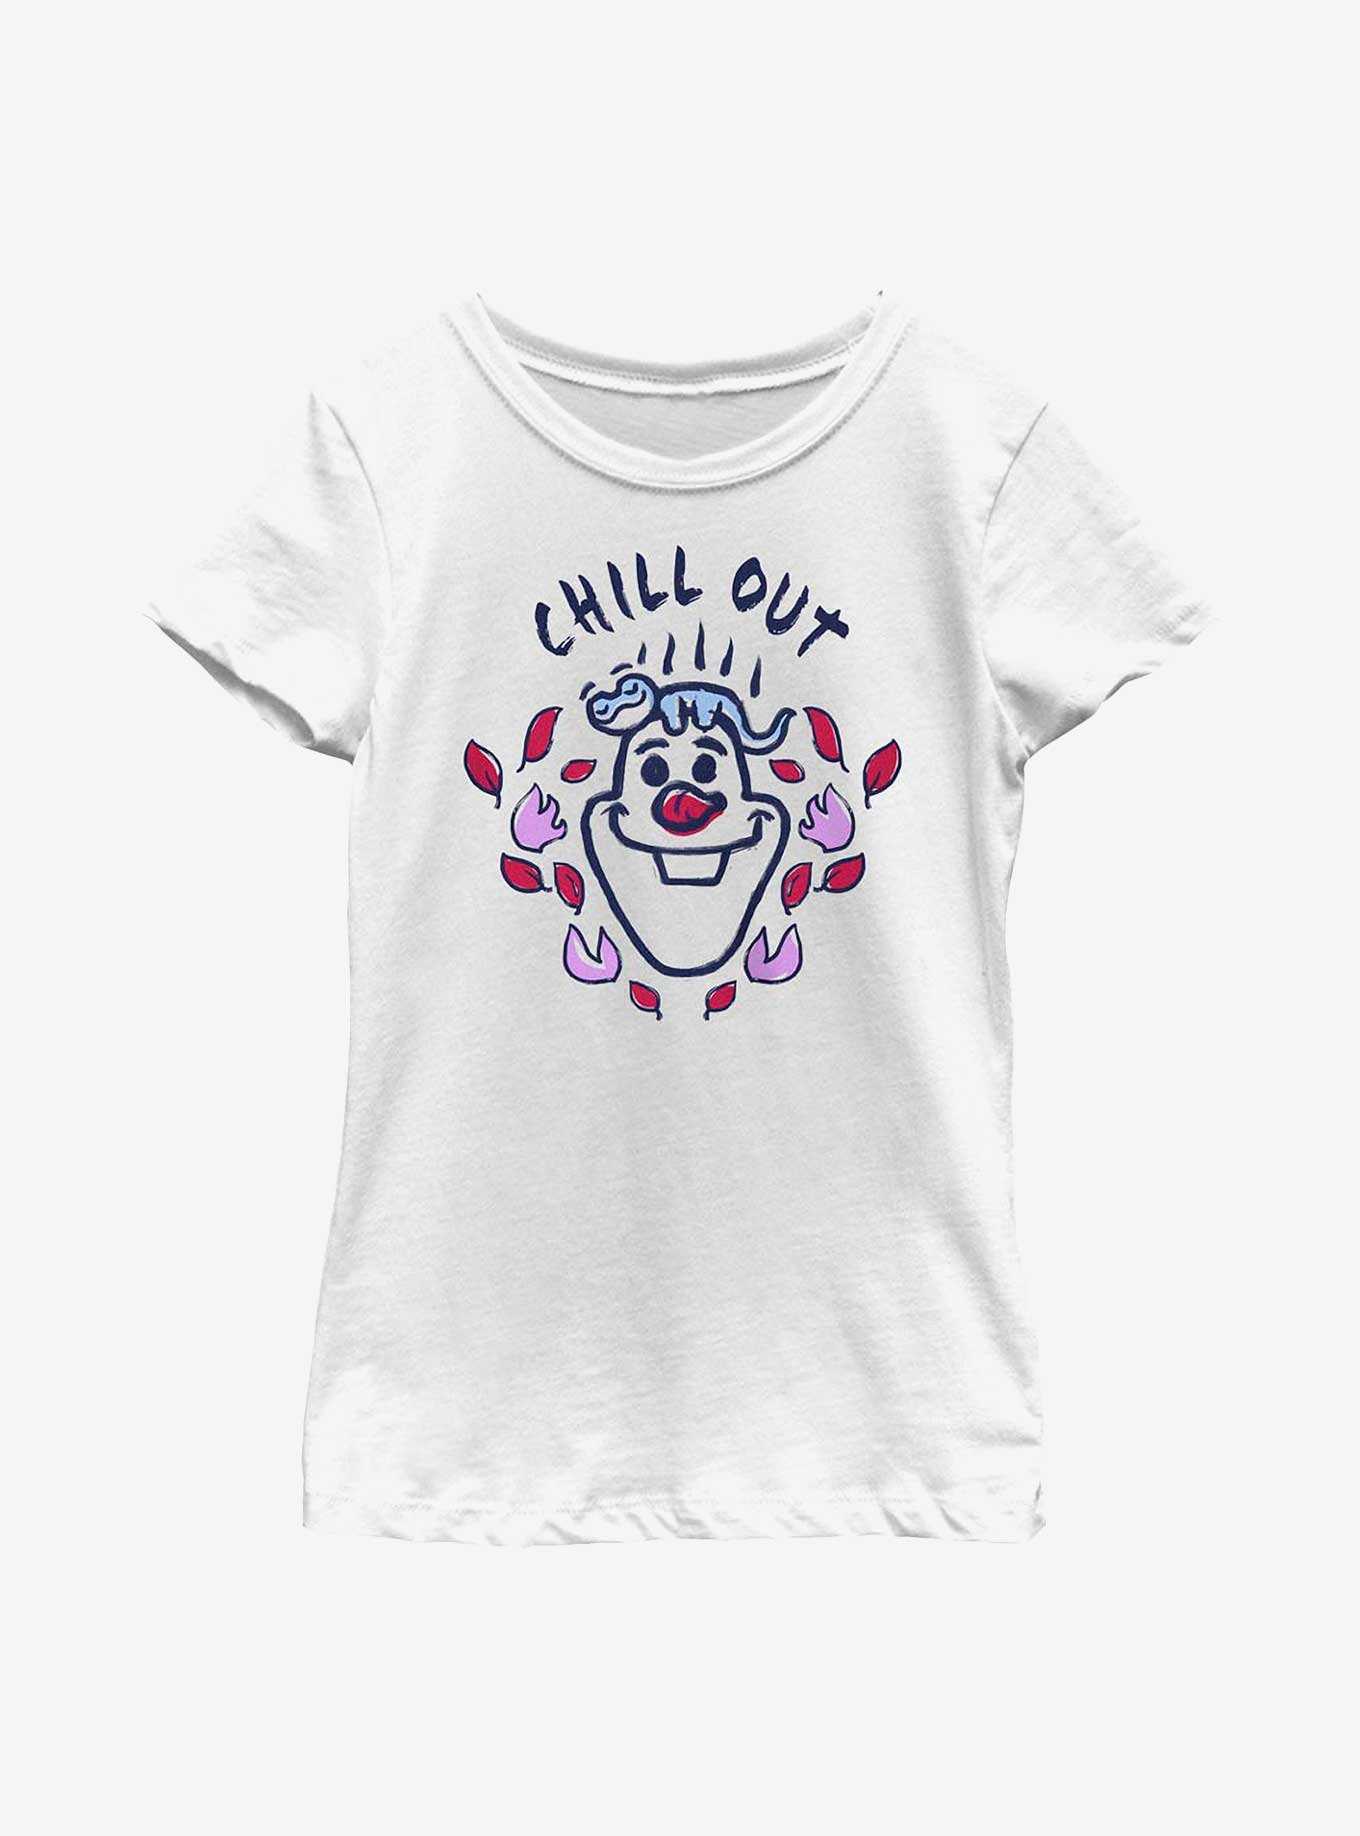 Disney Frozen 2 Olaf Chill OutYouth Girls T-Shirt, , hi-res